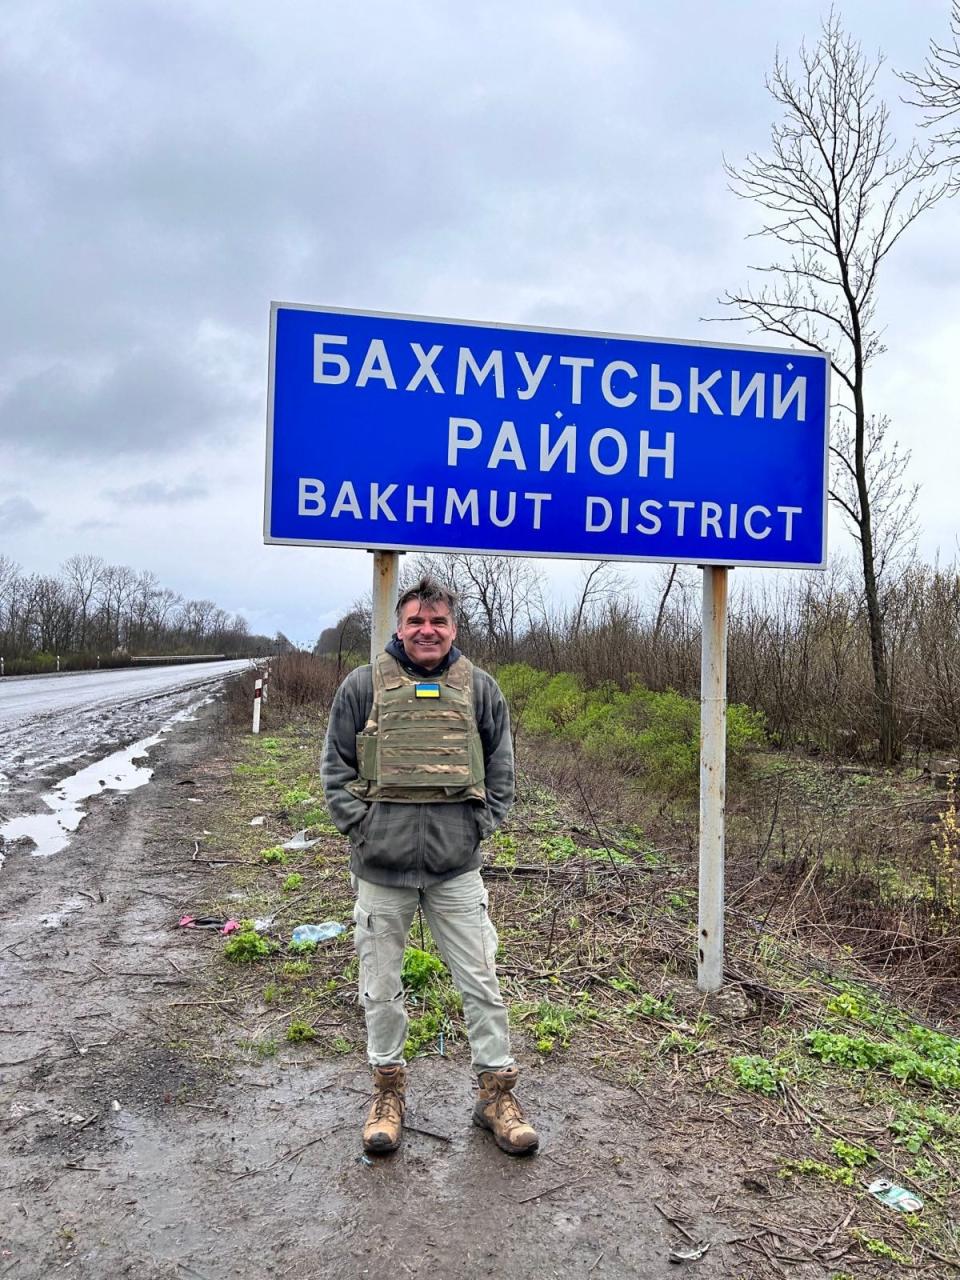 In a post to Instagram on Sunday, Road to Relief confirmed Anthony 'Tonko' Ihnat was killed while on his way with three other volunteers to assess the needs of civilians in the outskirts of Bakhmut.